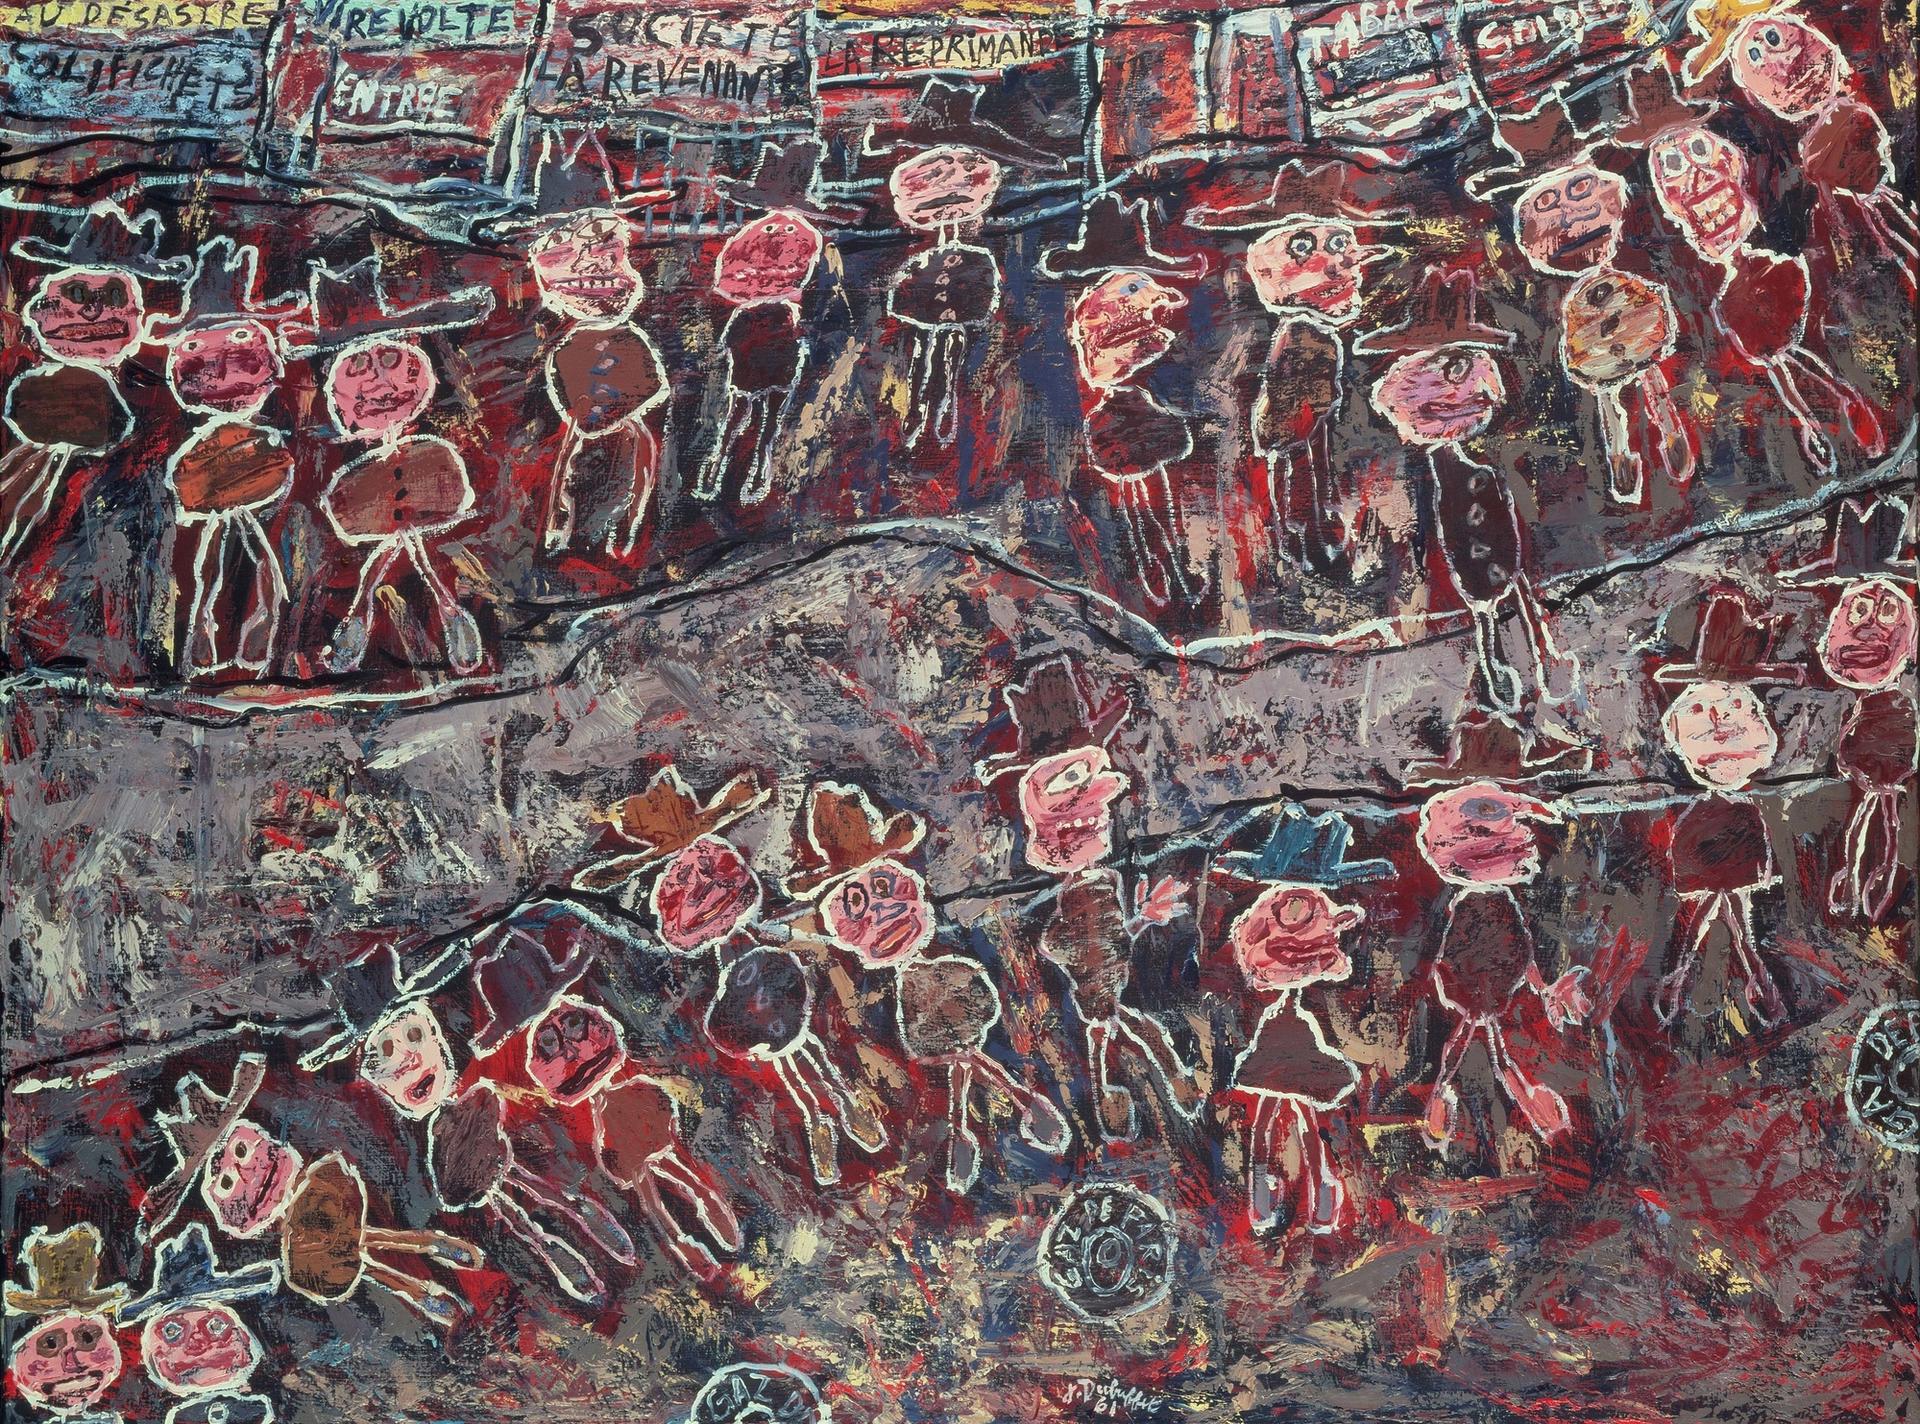 Dubuffet's Vire-volte (1961) is on loan from the Tate ADAGP,  Paris  and  DACS,  London  2018